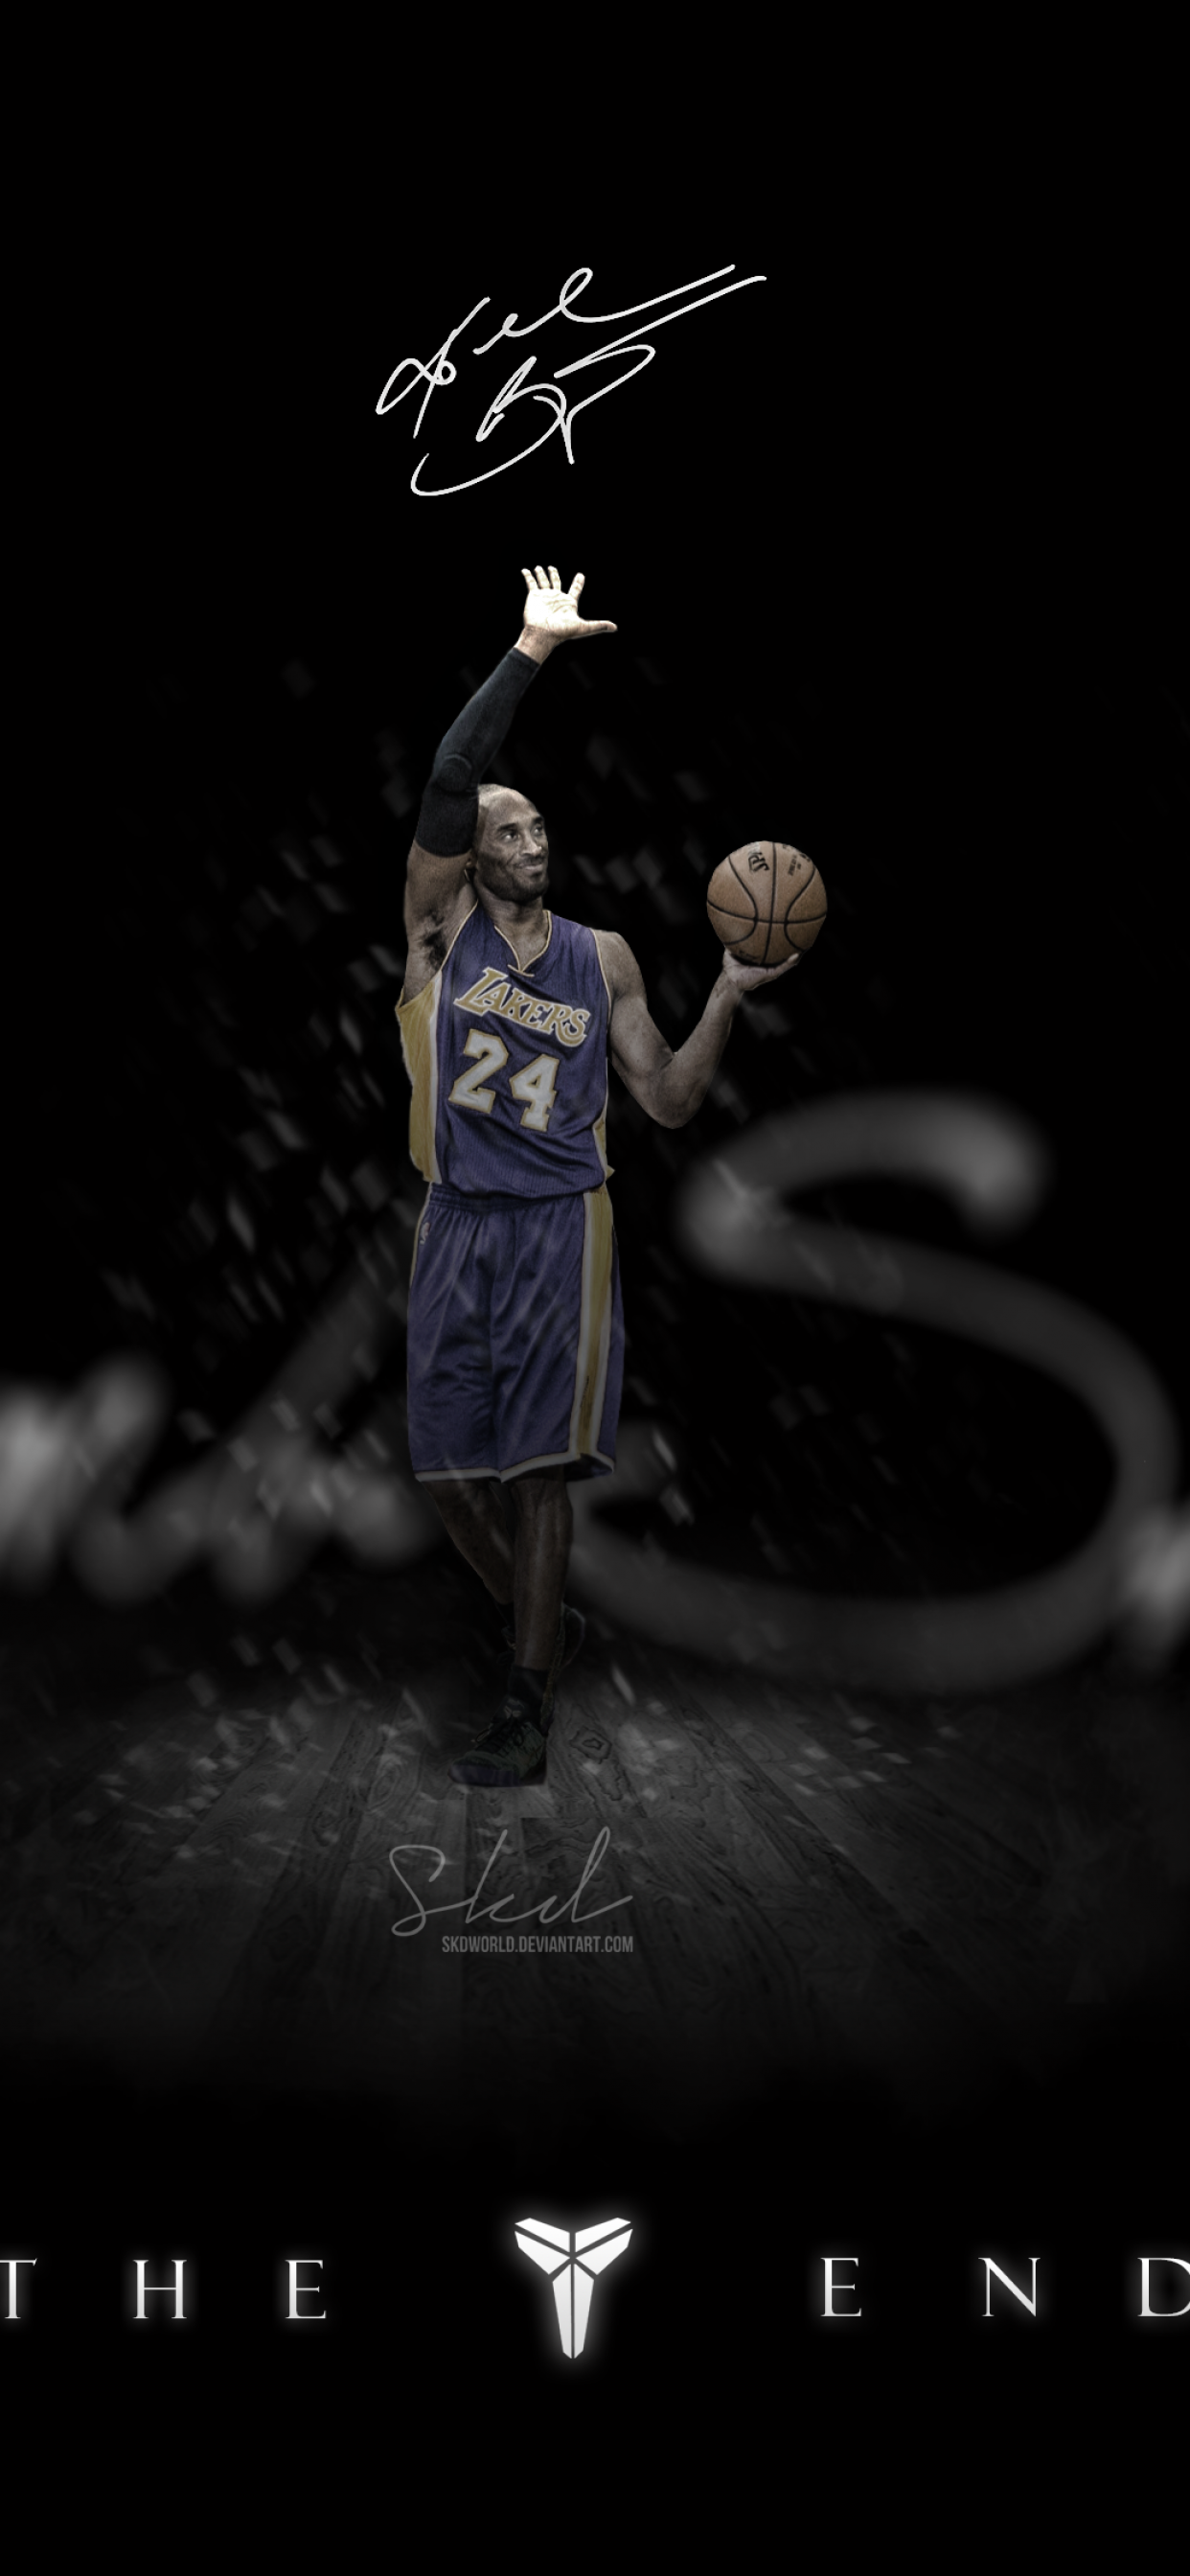 Download 1242x2688 Los Angeles Lakers, Kobe Bryant, Basketball Player, Nba Wallpaper for iPhone 11 Pro Max & XS Max